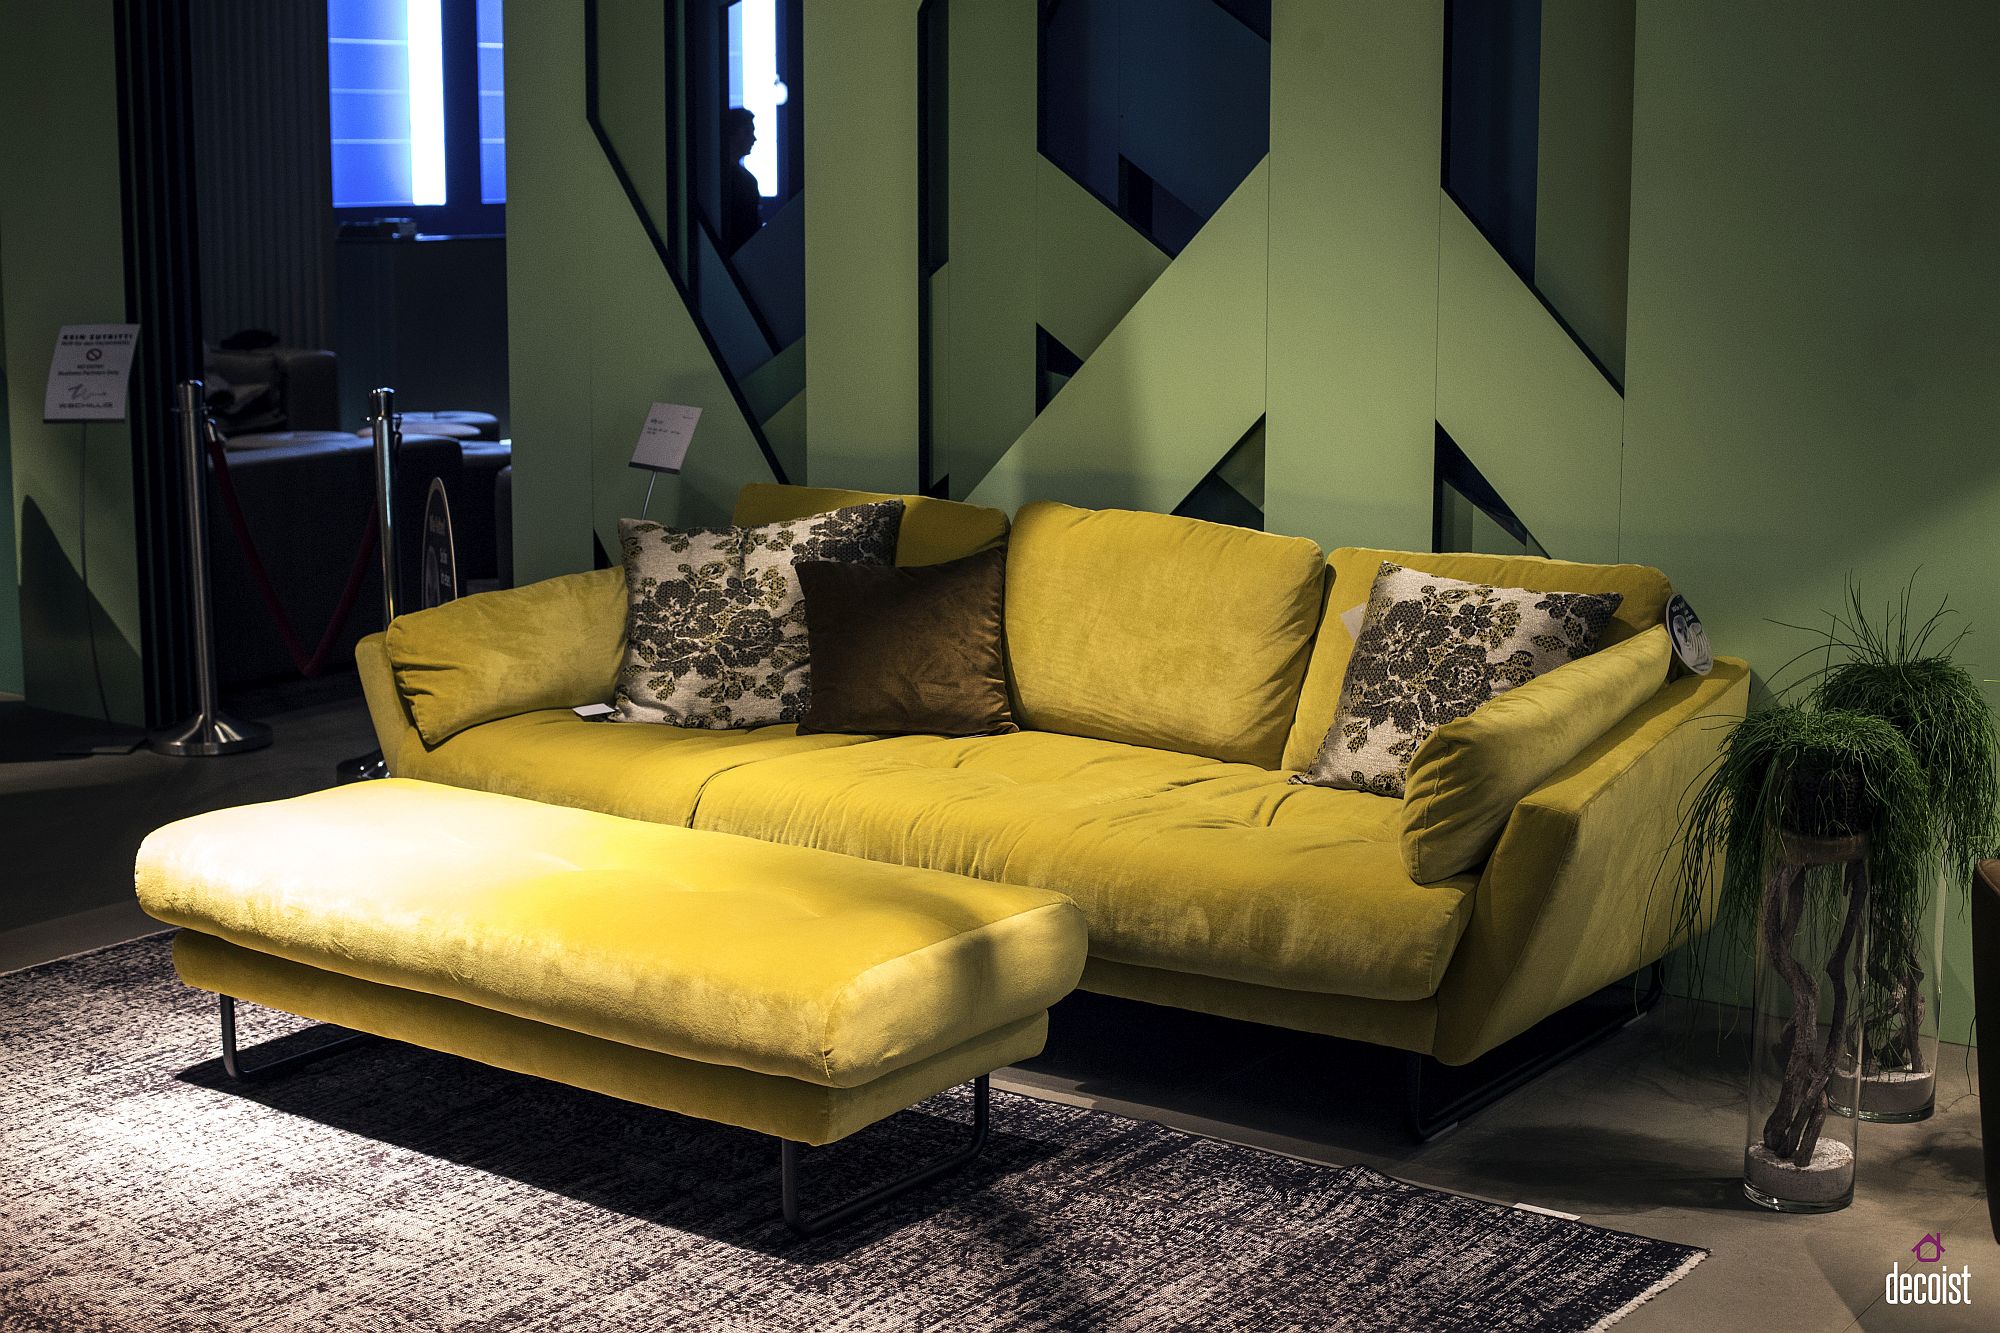 Yellow-sofa-is-a-fine-choice-for-the-modern-eclectic-living-space